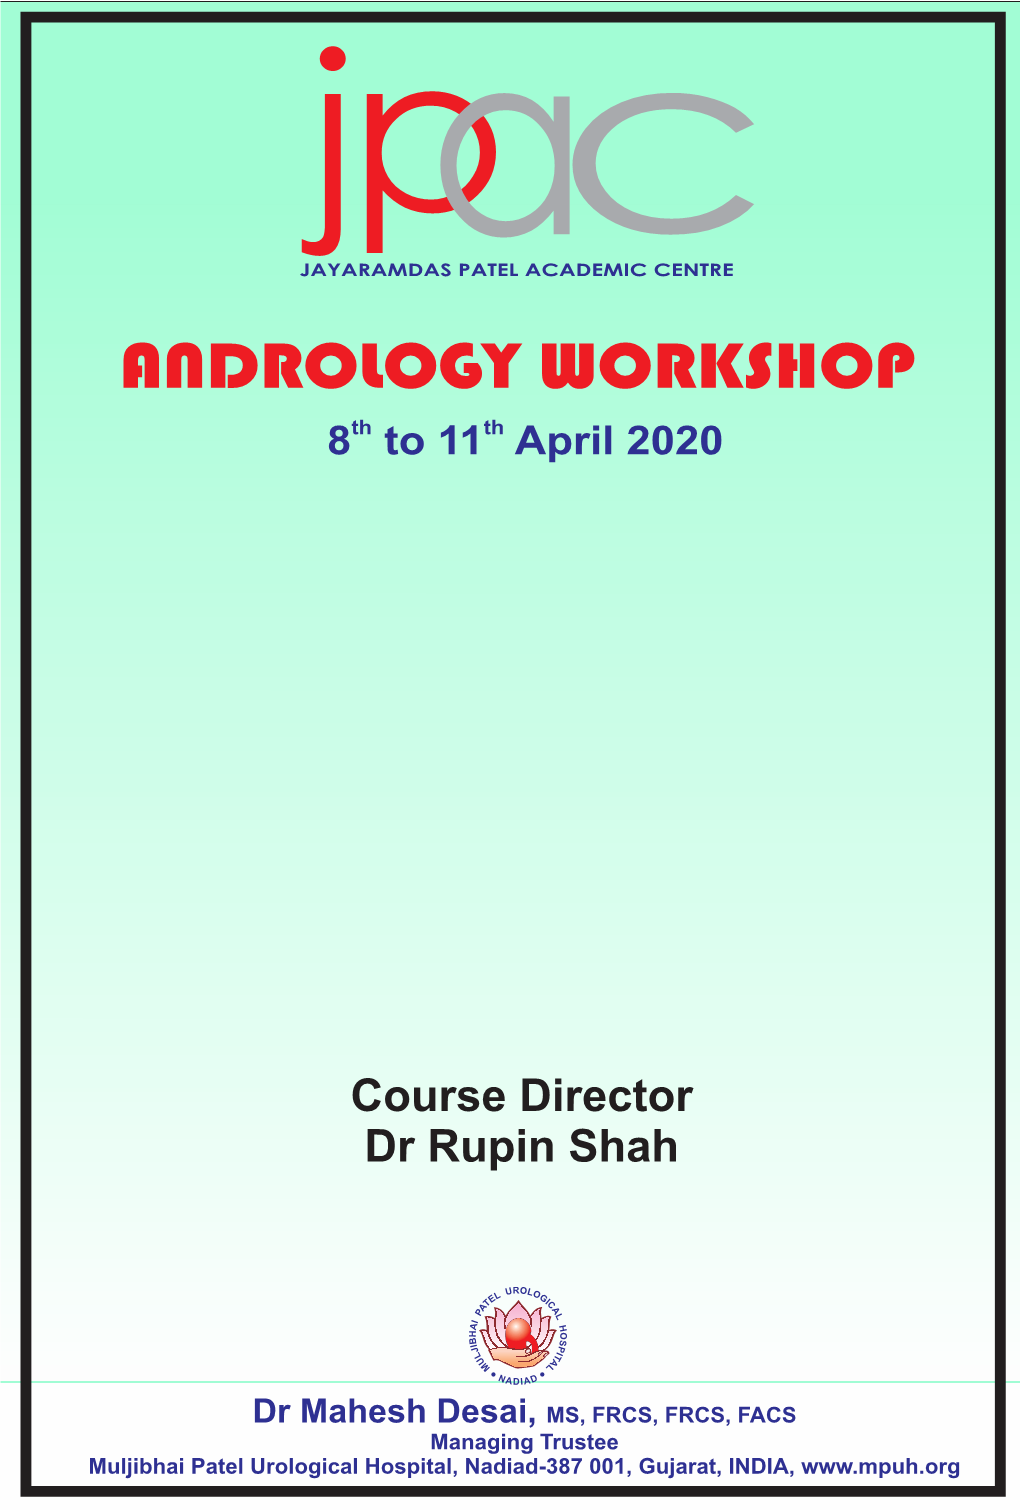 Andrology Course 8 to 11 April 2020